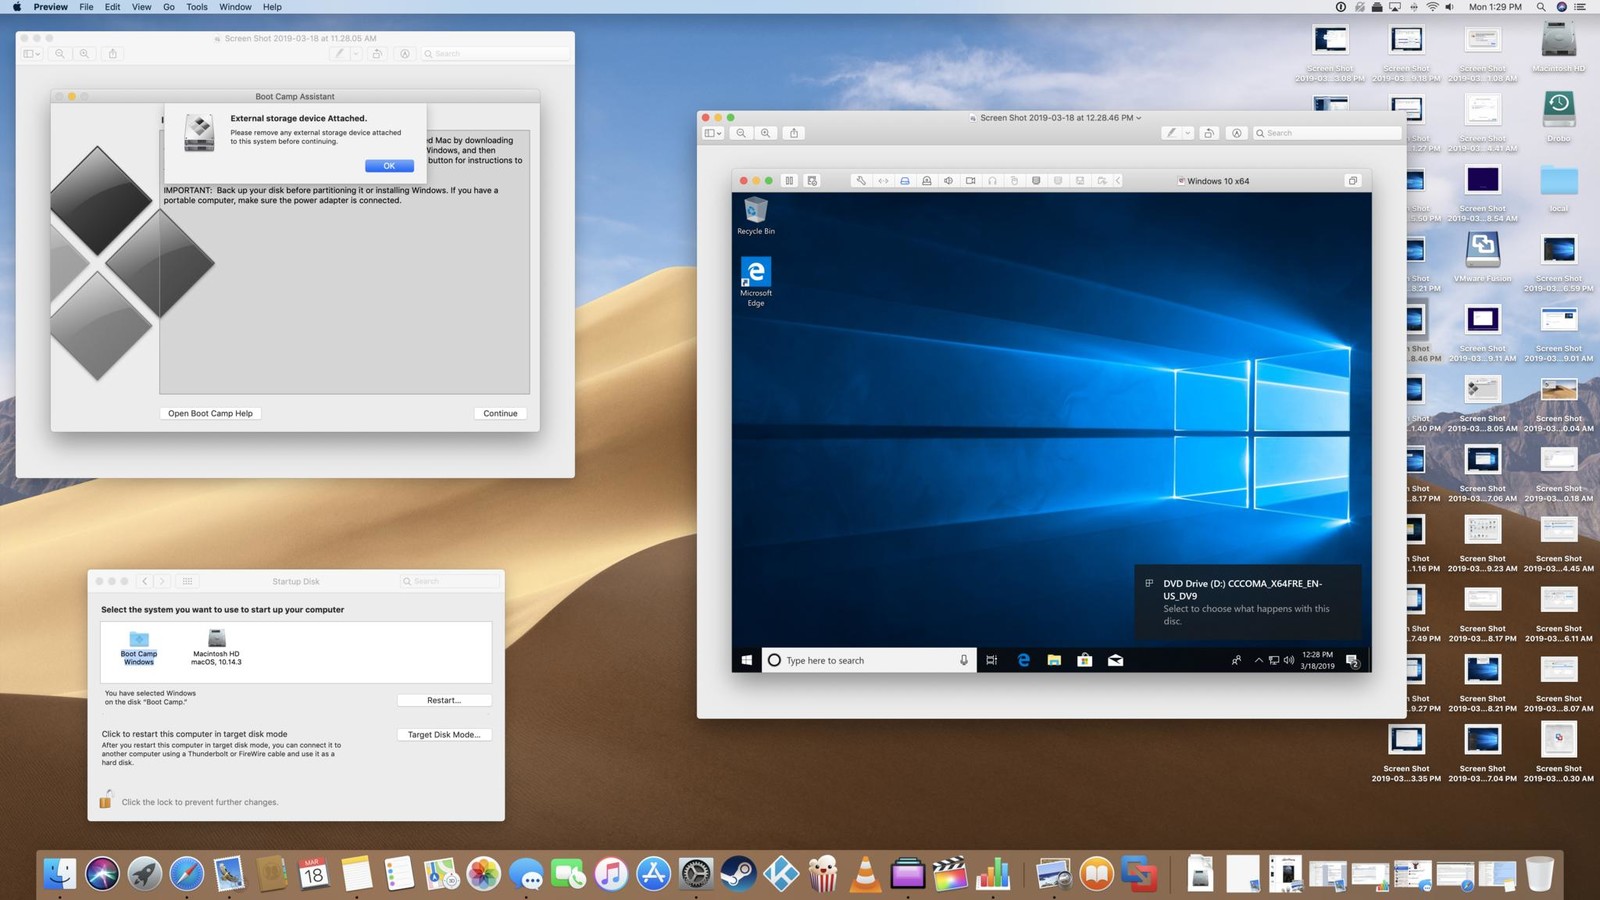 mac os x iso download for virtualbox